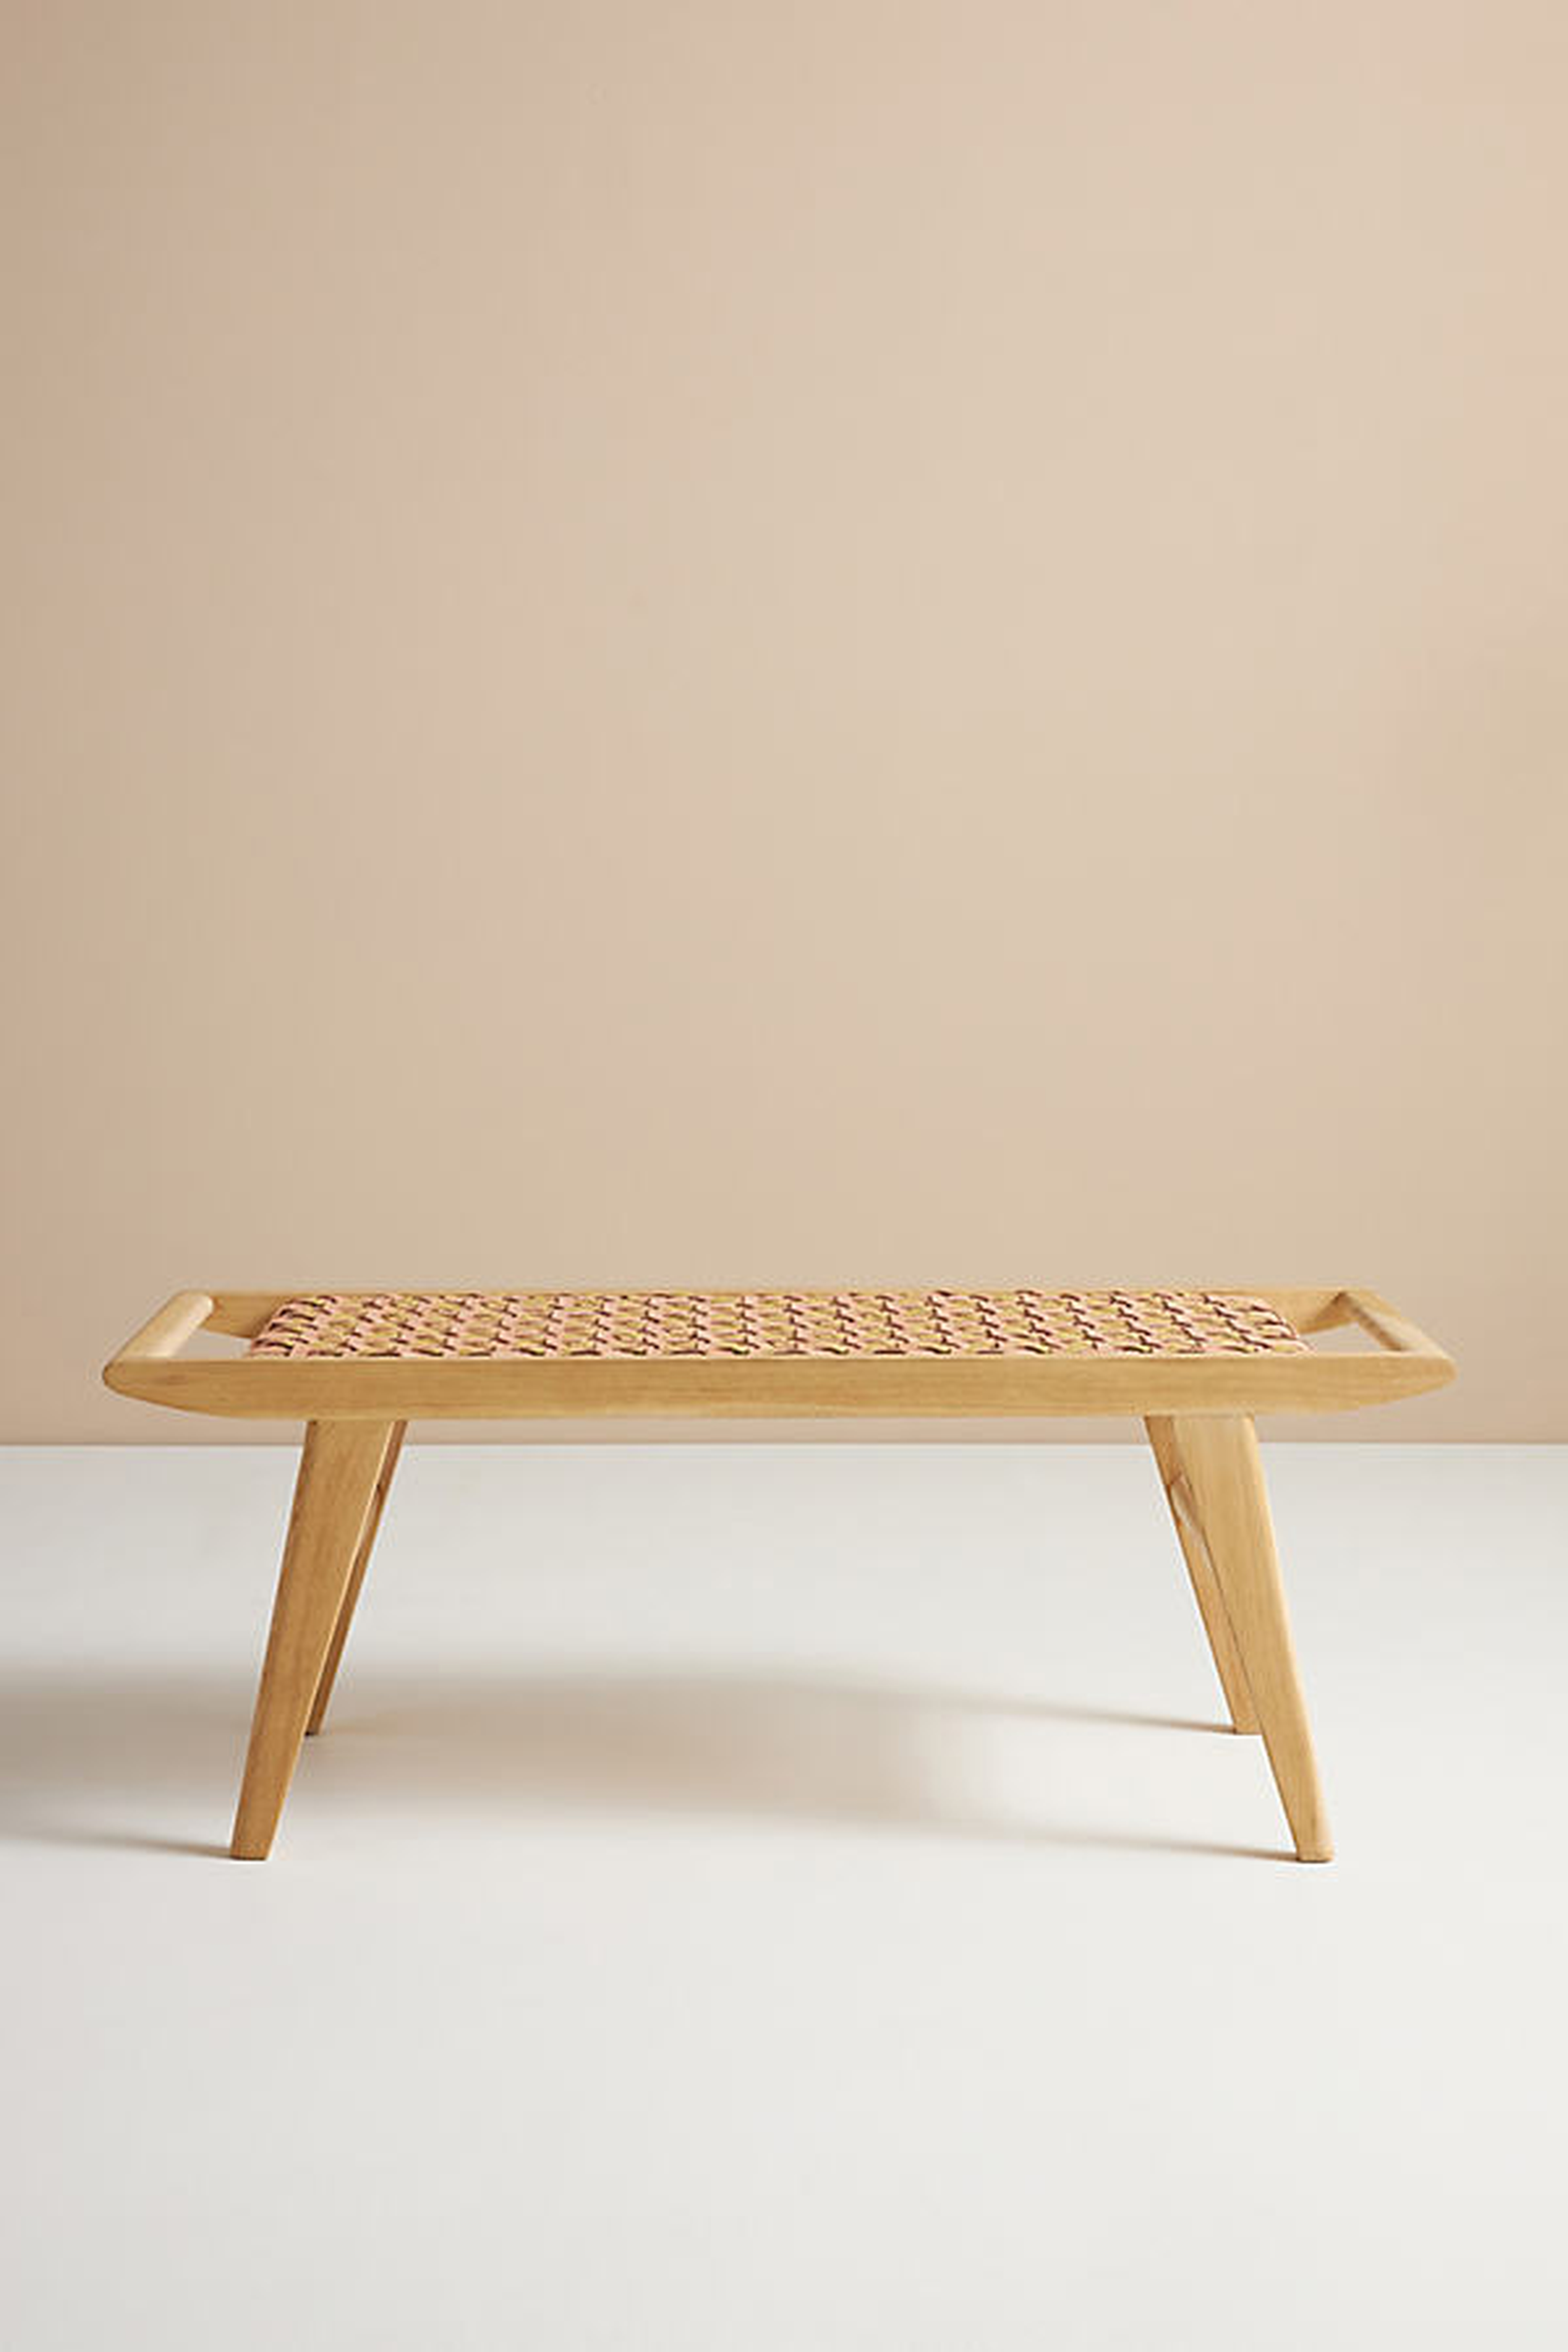 Cove Bench By Anthropologie in Beige - Anthropologie